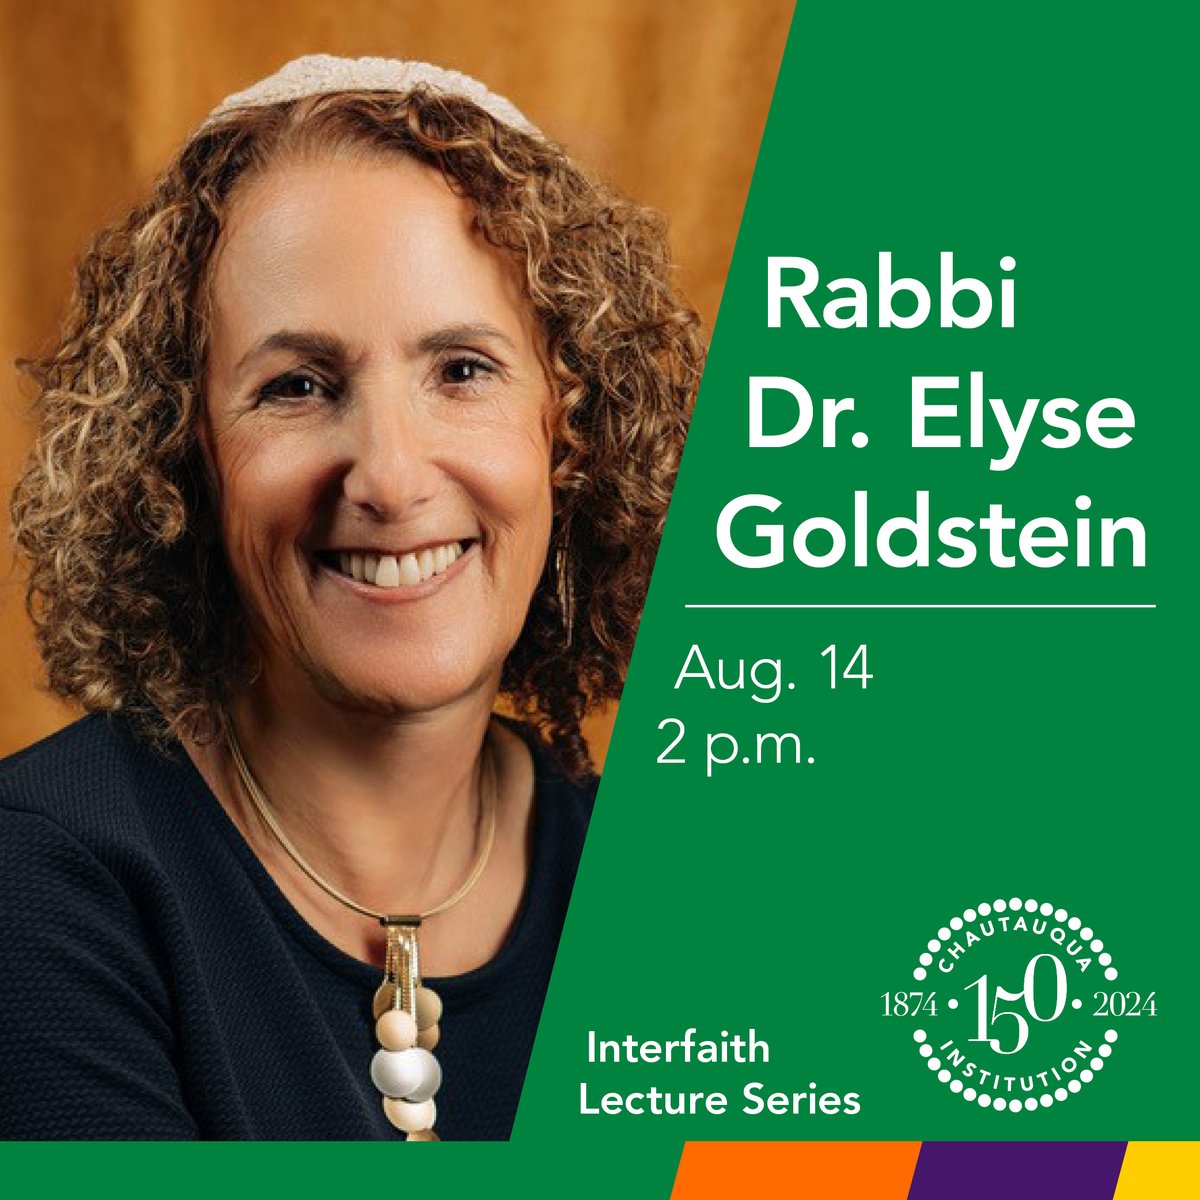 🚨#CHQ2024 ANNOUNCEMENT🚨 Rabbi Dr. Elyse Goldstein, founding Rabbi of City Shul, joins our 2024 Interfaith Lecture Series for a season of extraordinary events and experiences in Chautauqua's 150 year! #CHQ2024 #chq150 #INFWeekEight